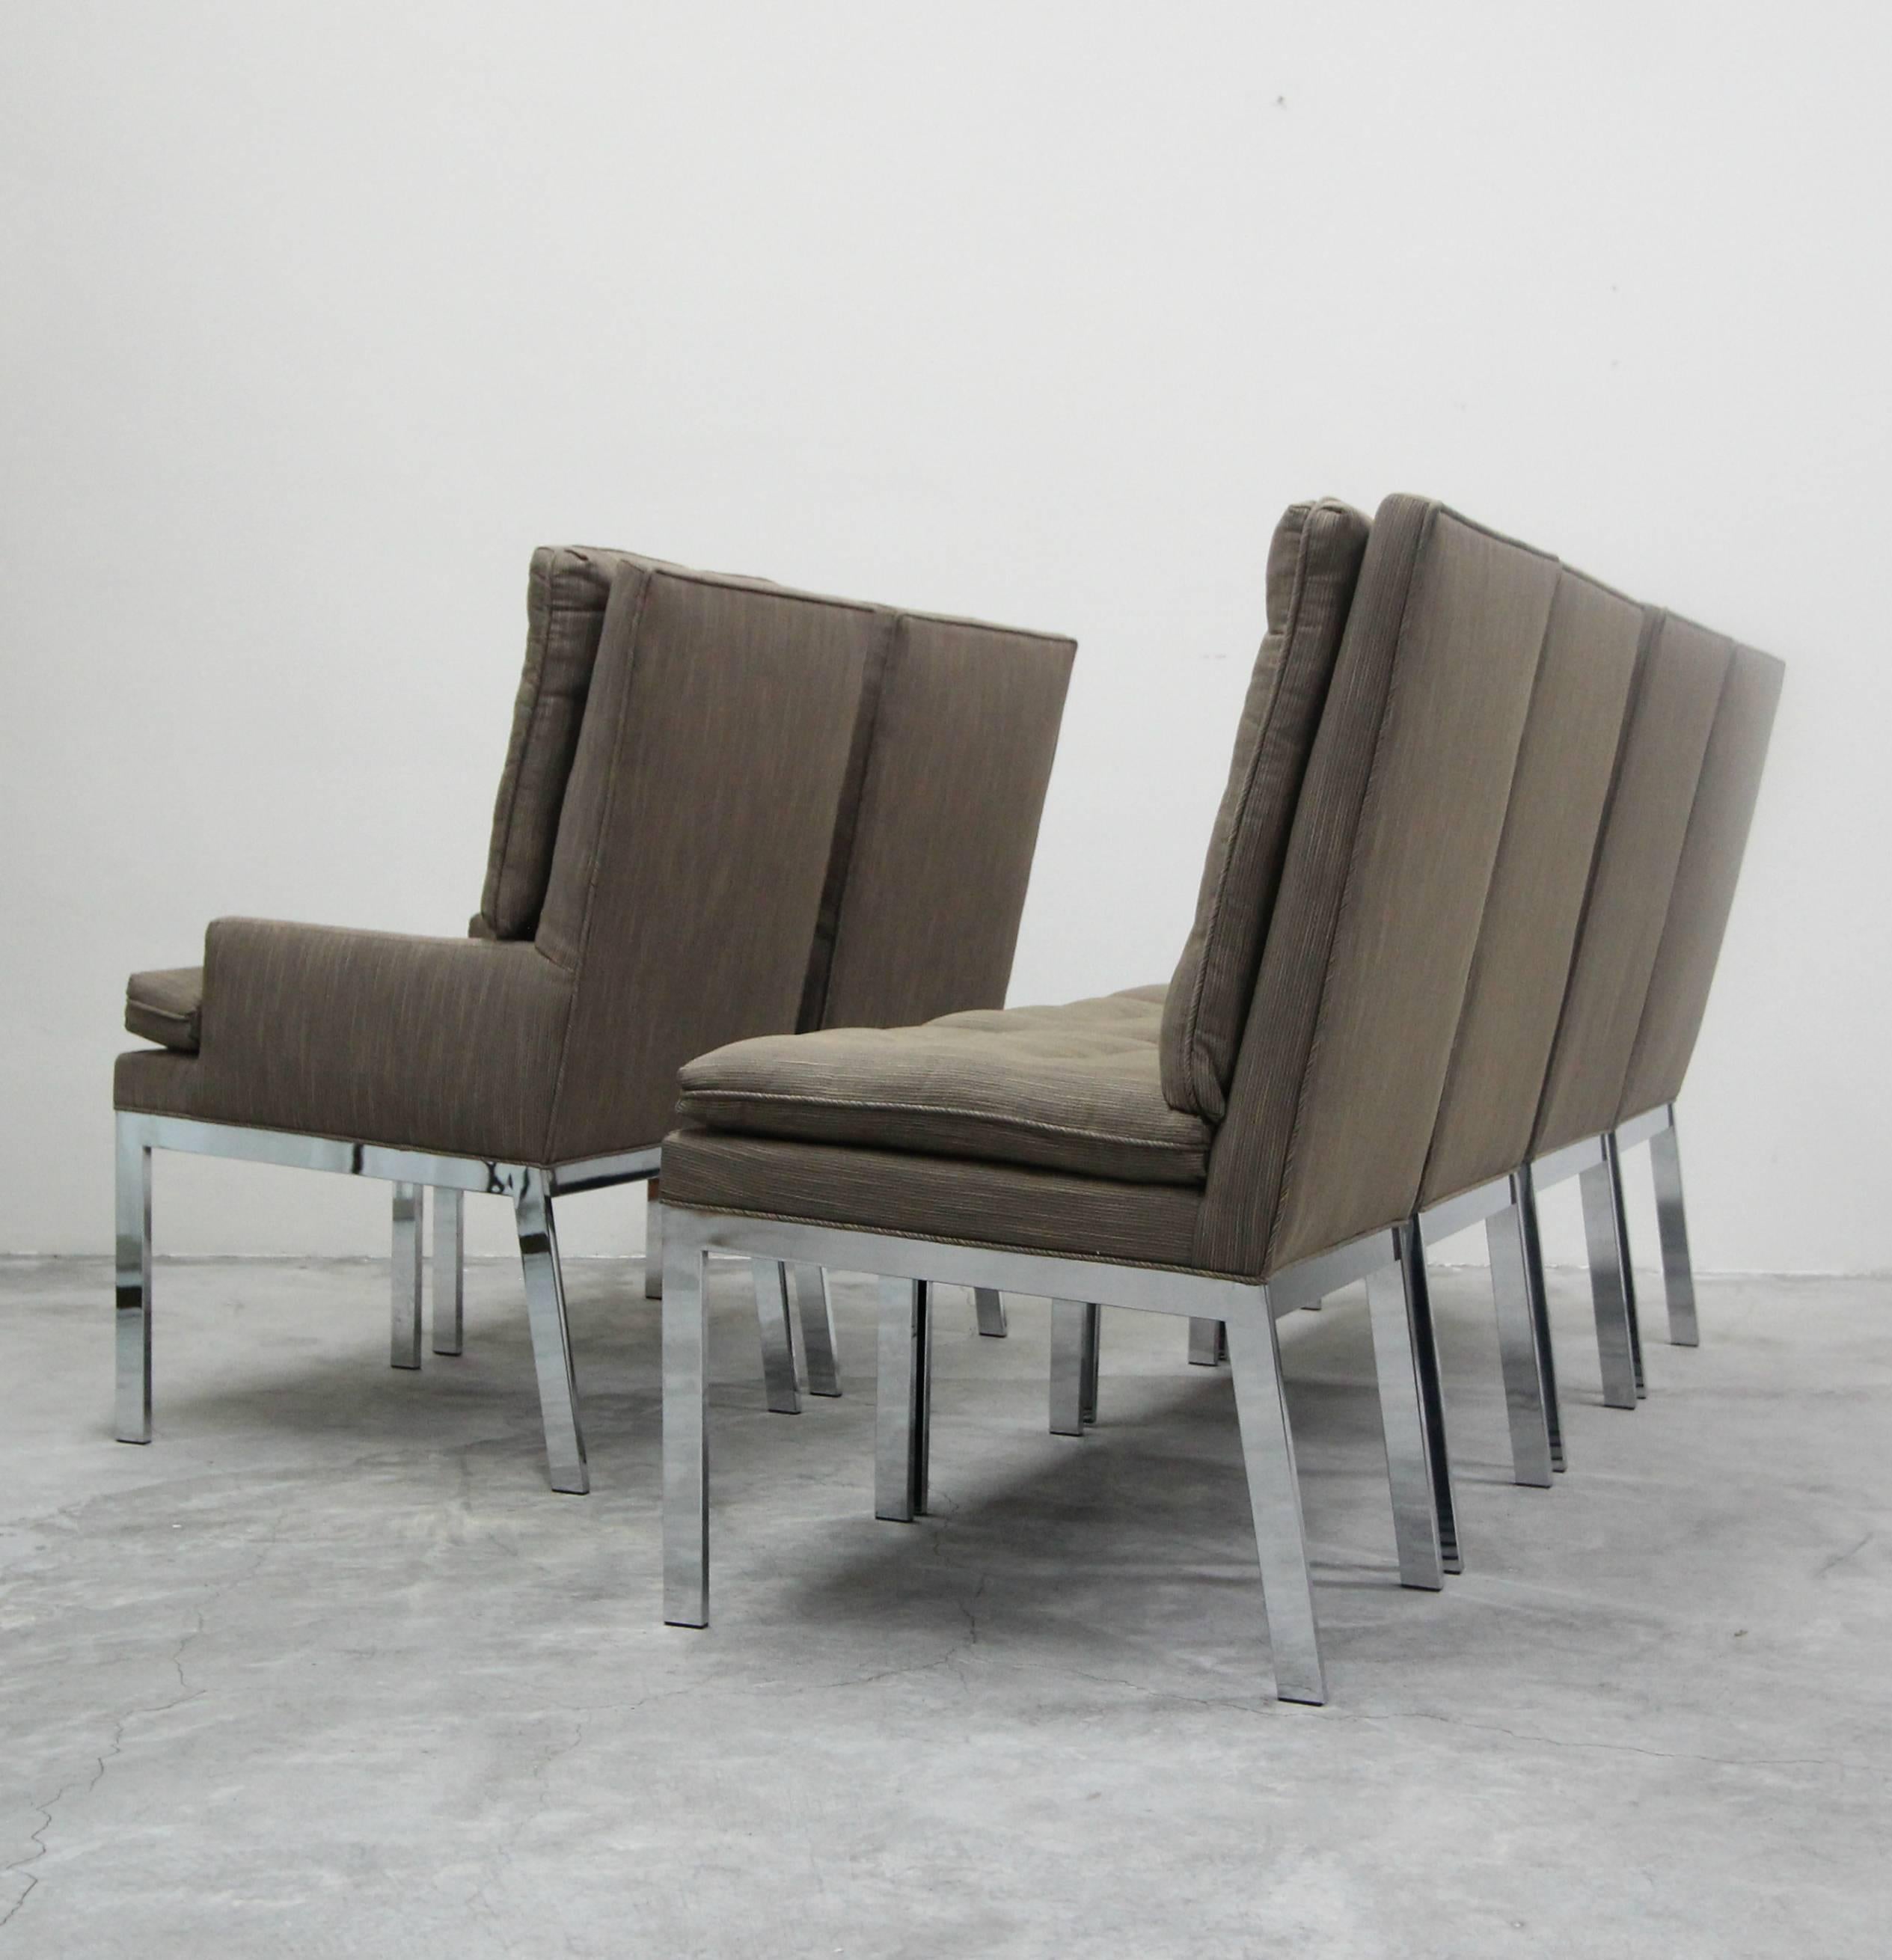 Exquisite set of chrome dining chairs designed by Milo Baughman for Design Institute America (DIA). Mirrored chrome, modern beauties. Nicely angled legs. Recently upholstered, upholstery is in good used condition overall.